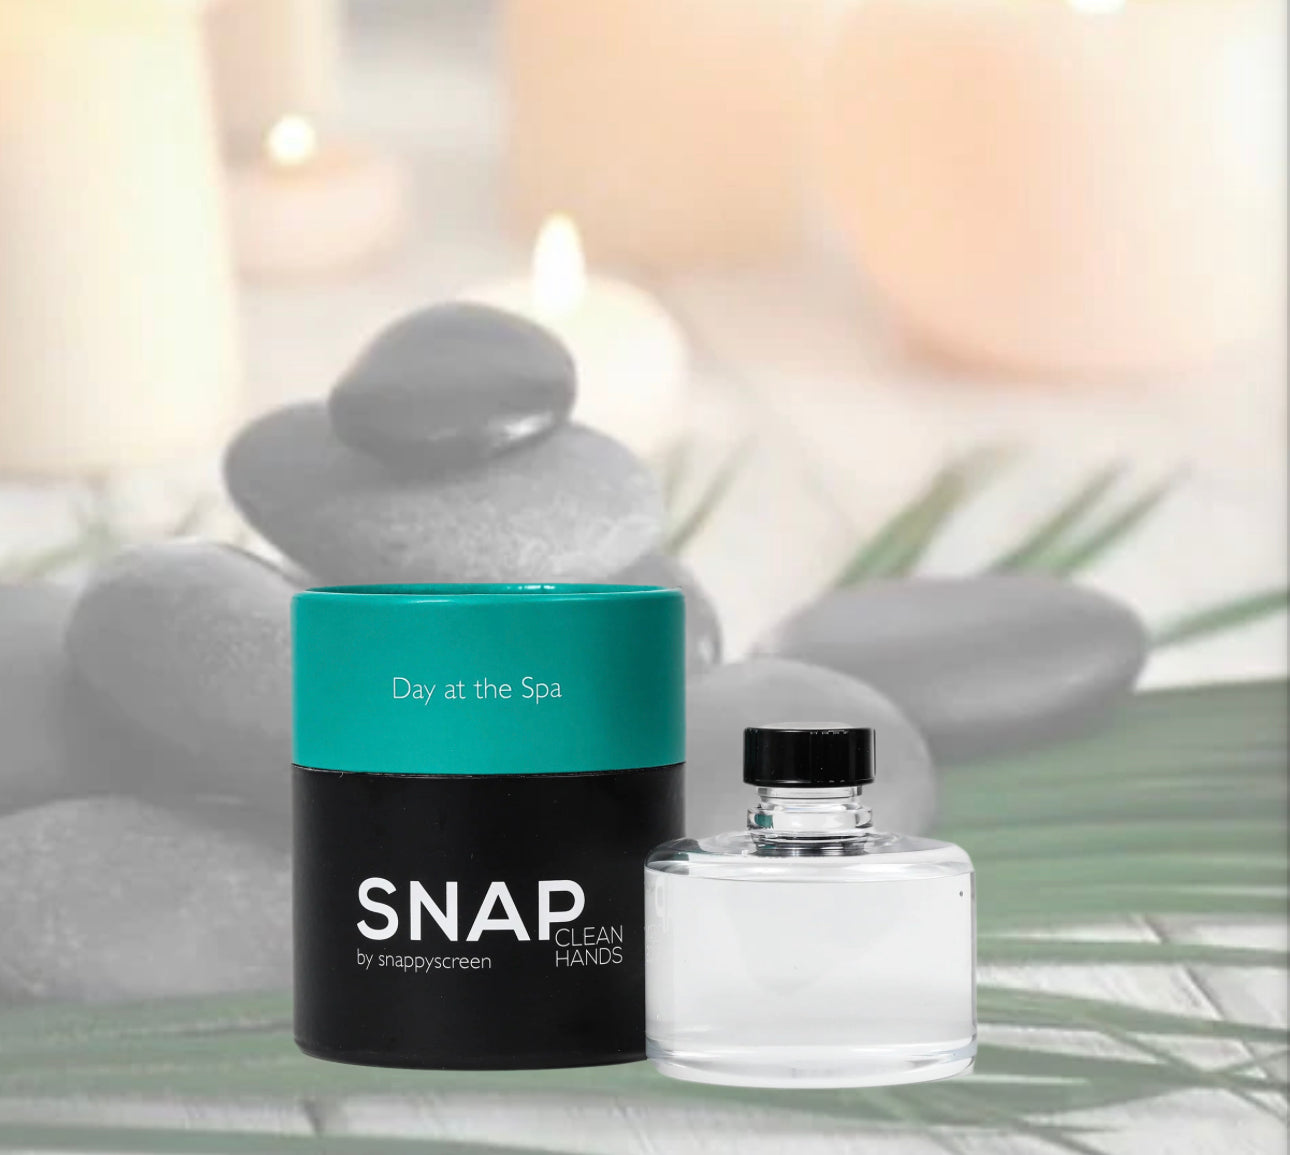 SNAP refill- DAY AT THE SPA